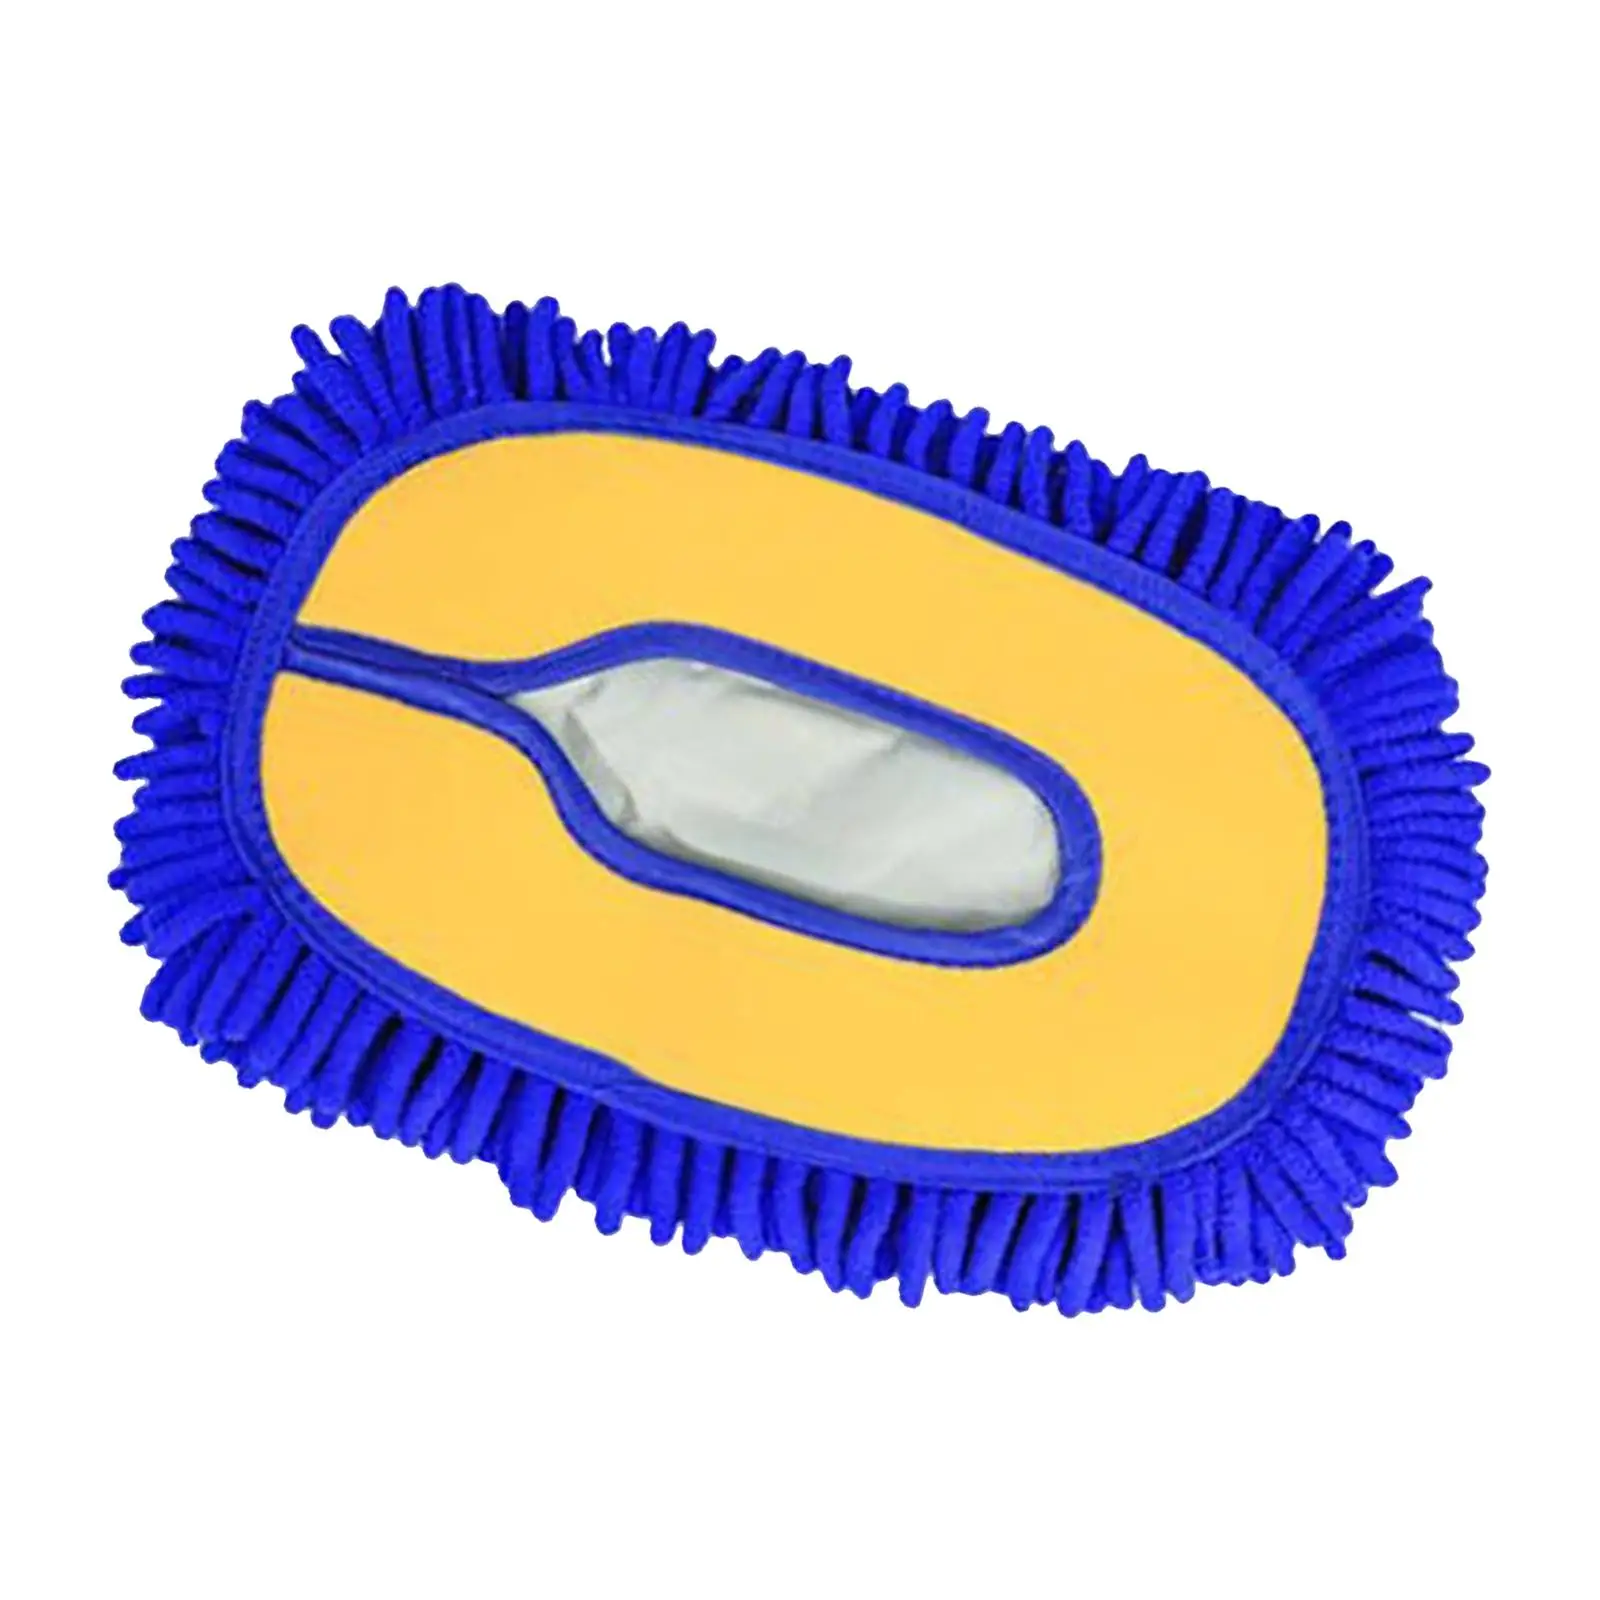 Microfiber Car Wash Mop Replacement Head Cleaning Tool Highly Absorbent Soft